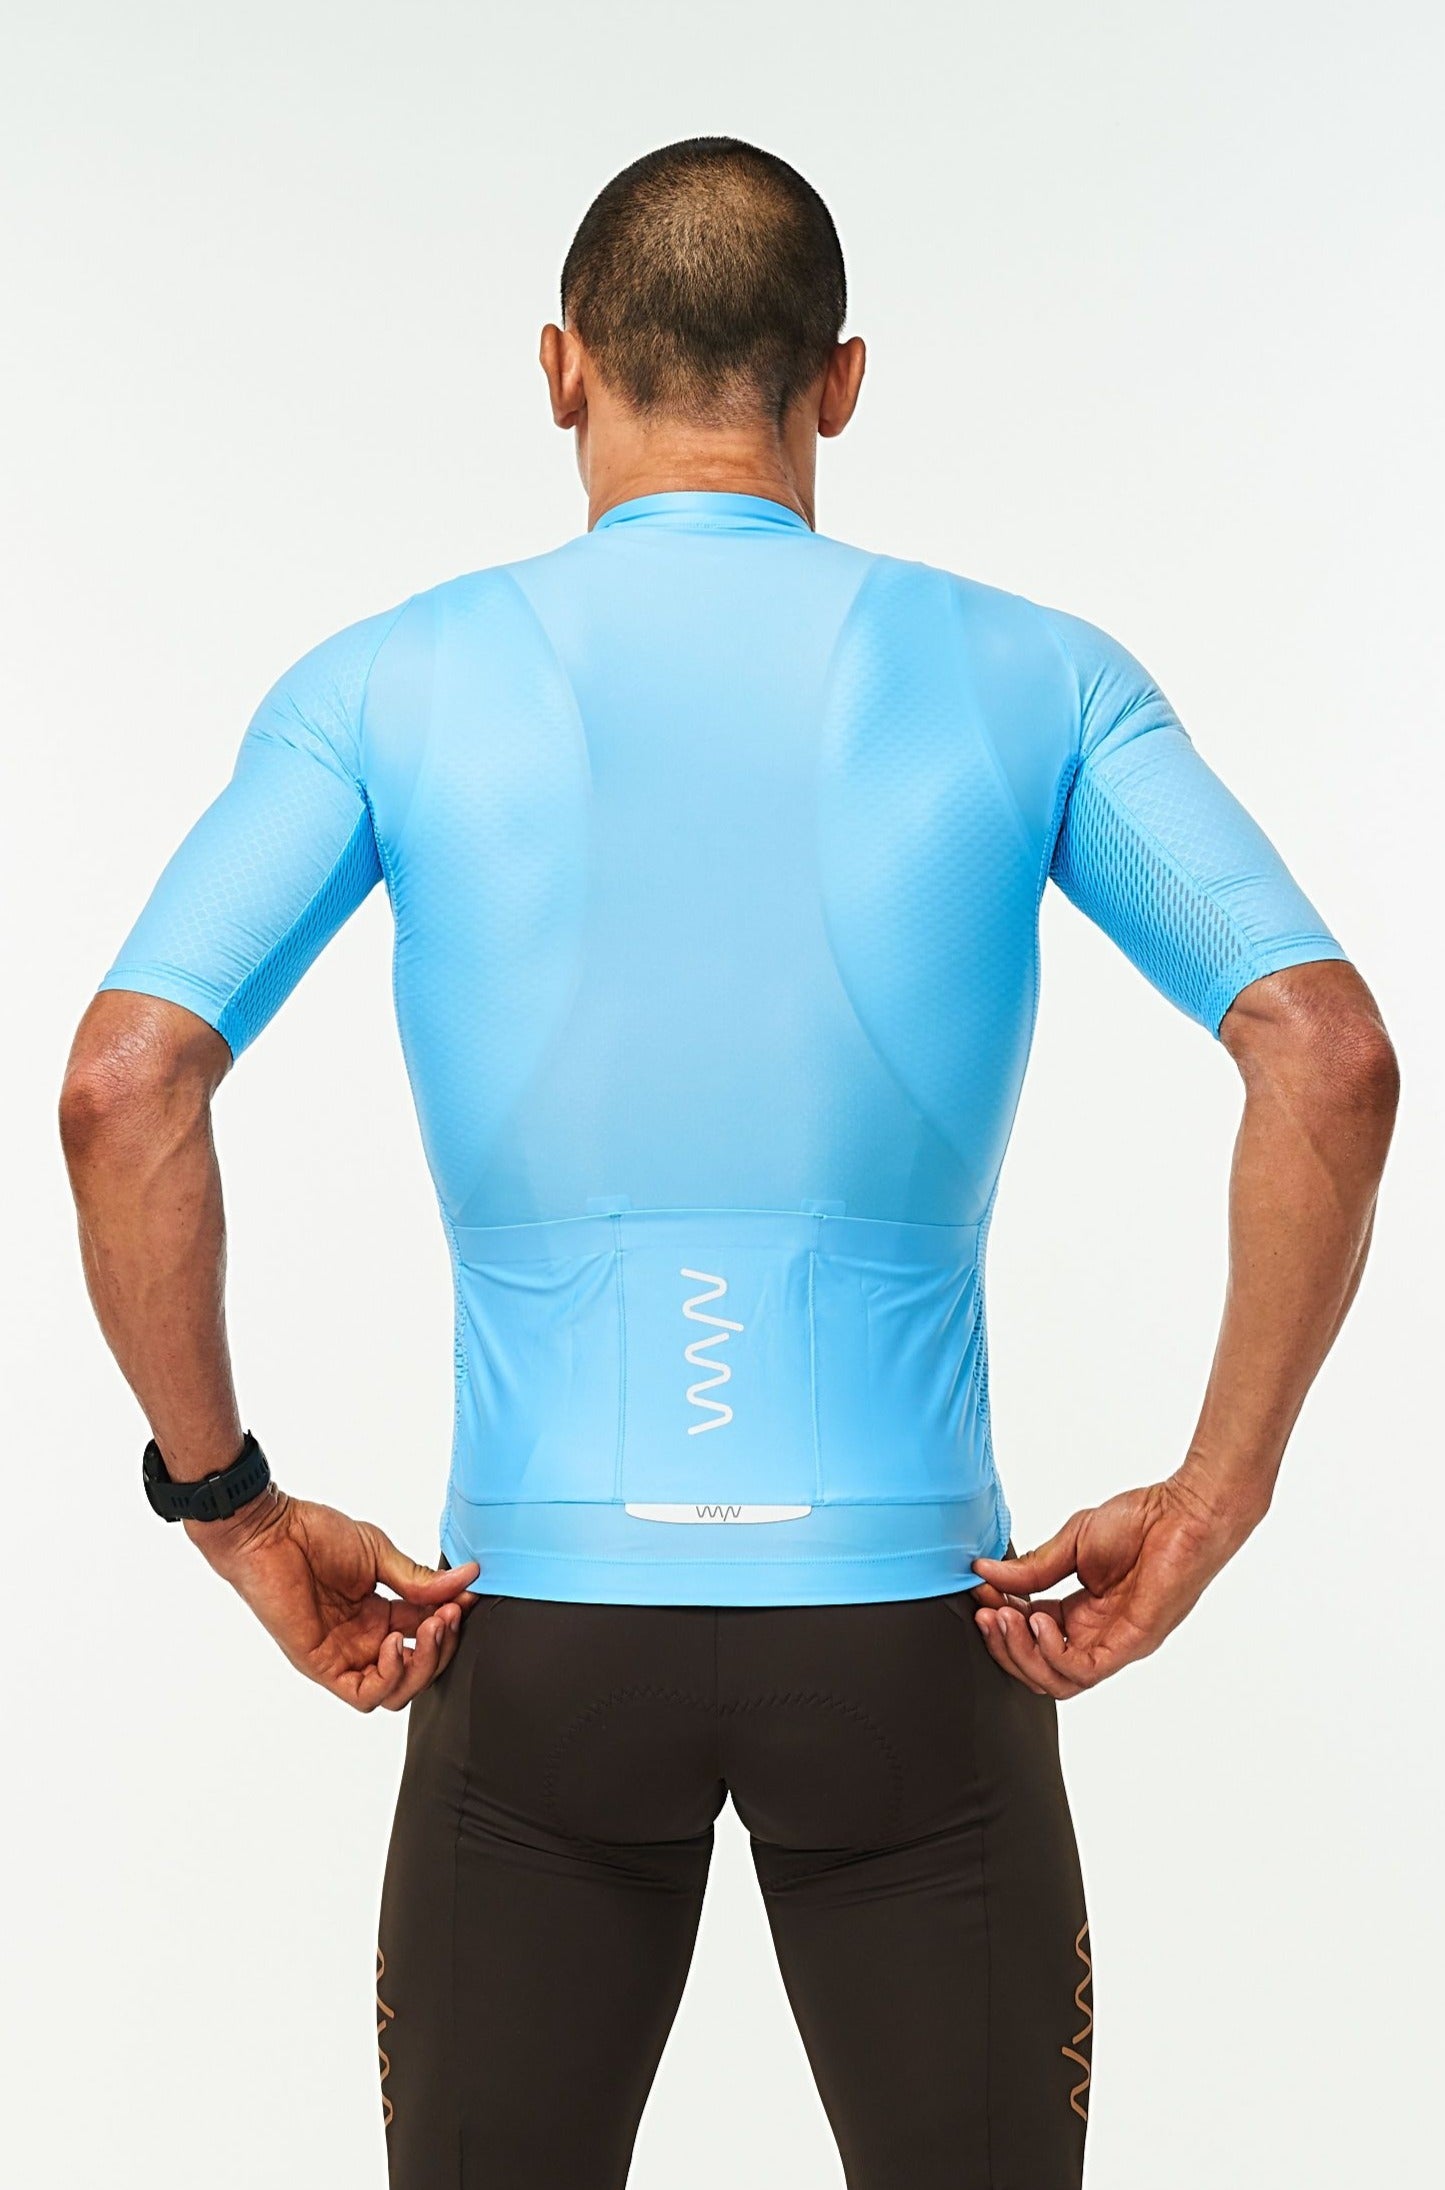 Back view men's Sky Blue Hex Racer Jersey. Cycling jersey with back reflective pockets for storage.